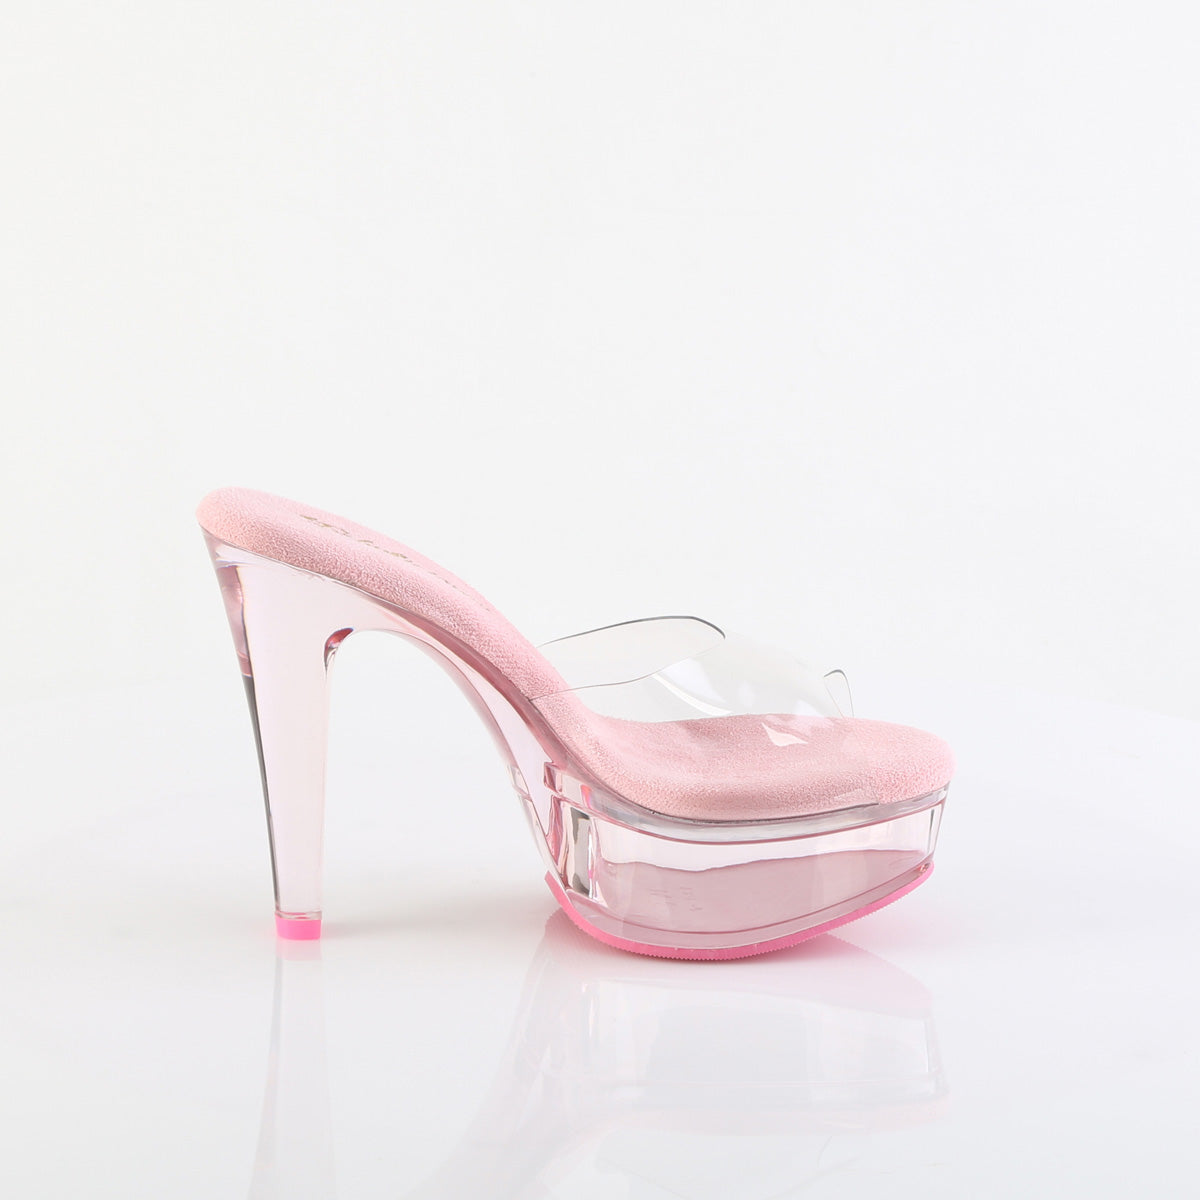 5 Inch Heel MARTINI-501 Clear Baby Pink